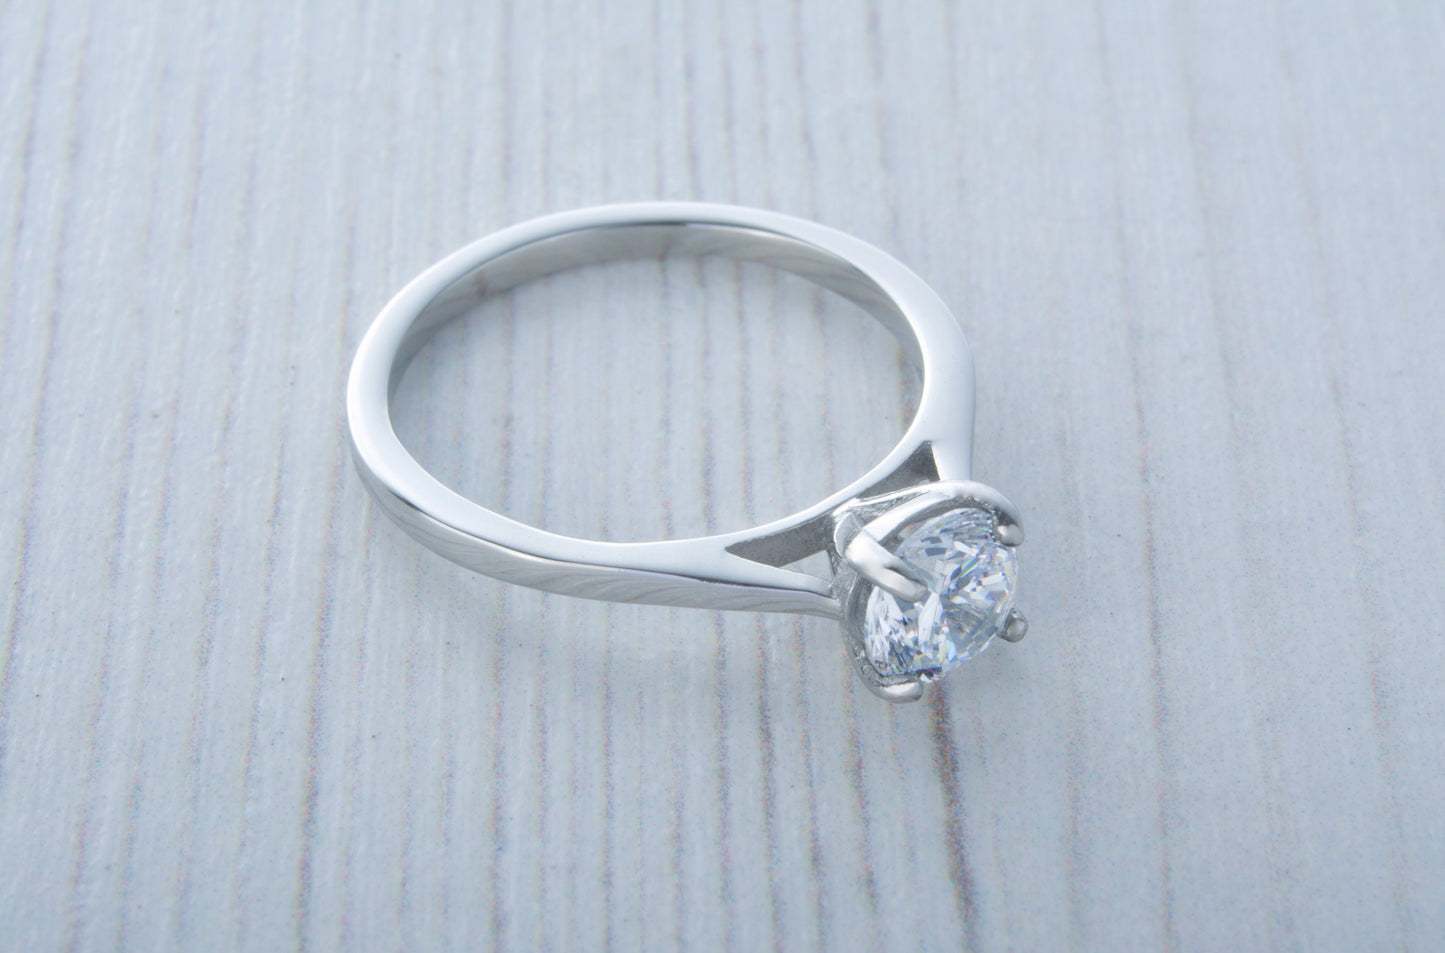 Genuine 6mm 1ct Moissanite cathedral setting solitaire ring in Titanium or White Gold - engagement ring - handmade ring